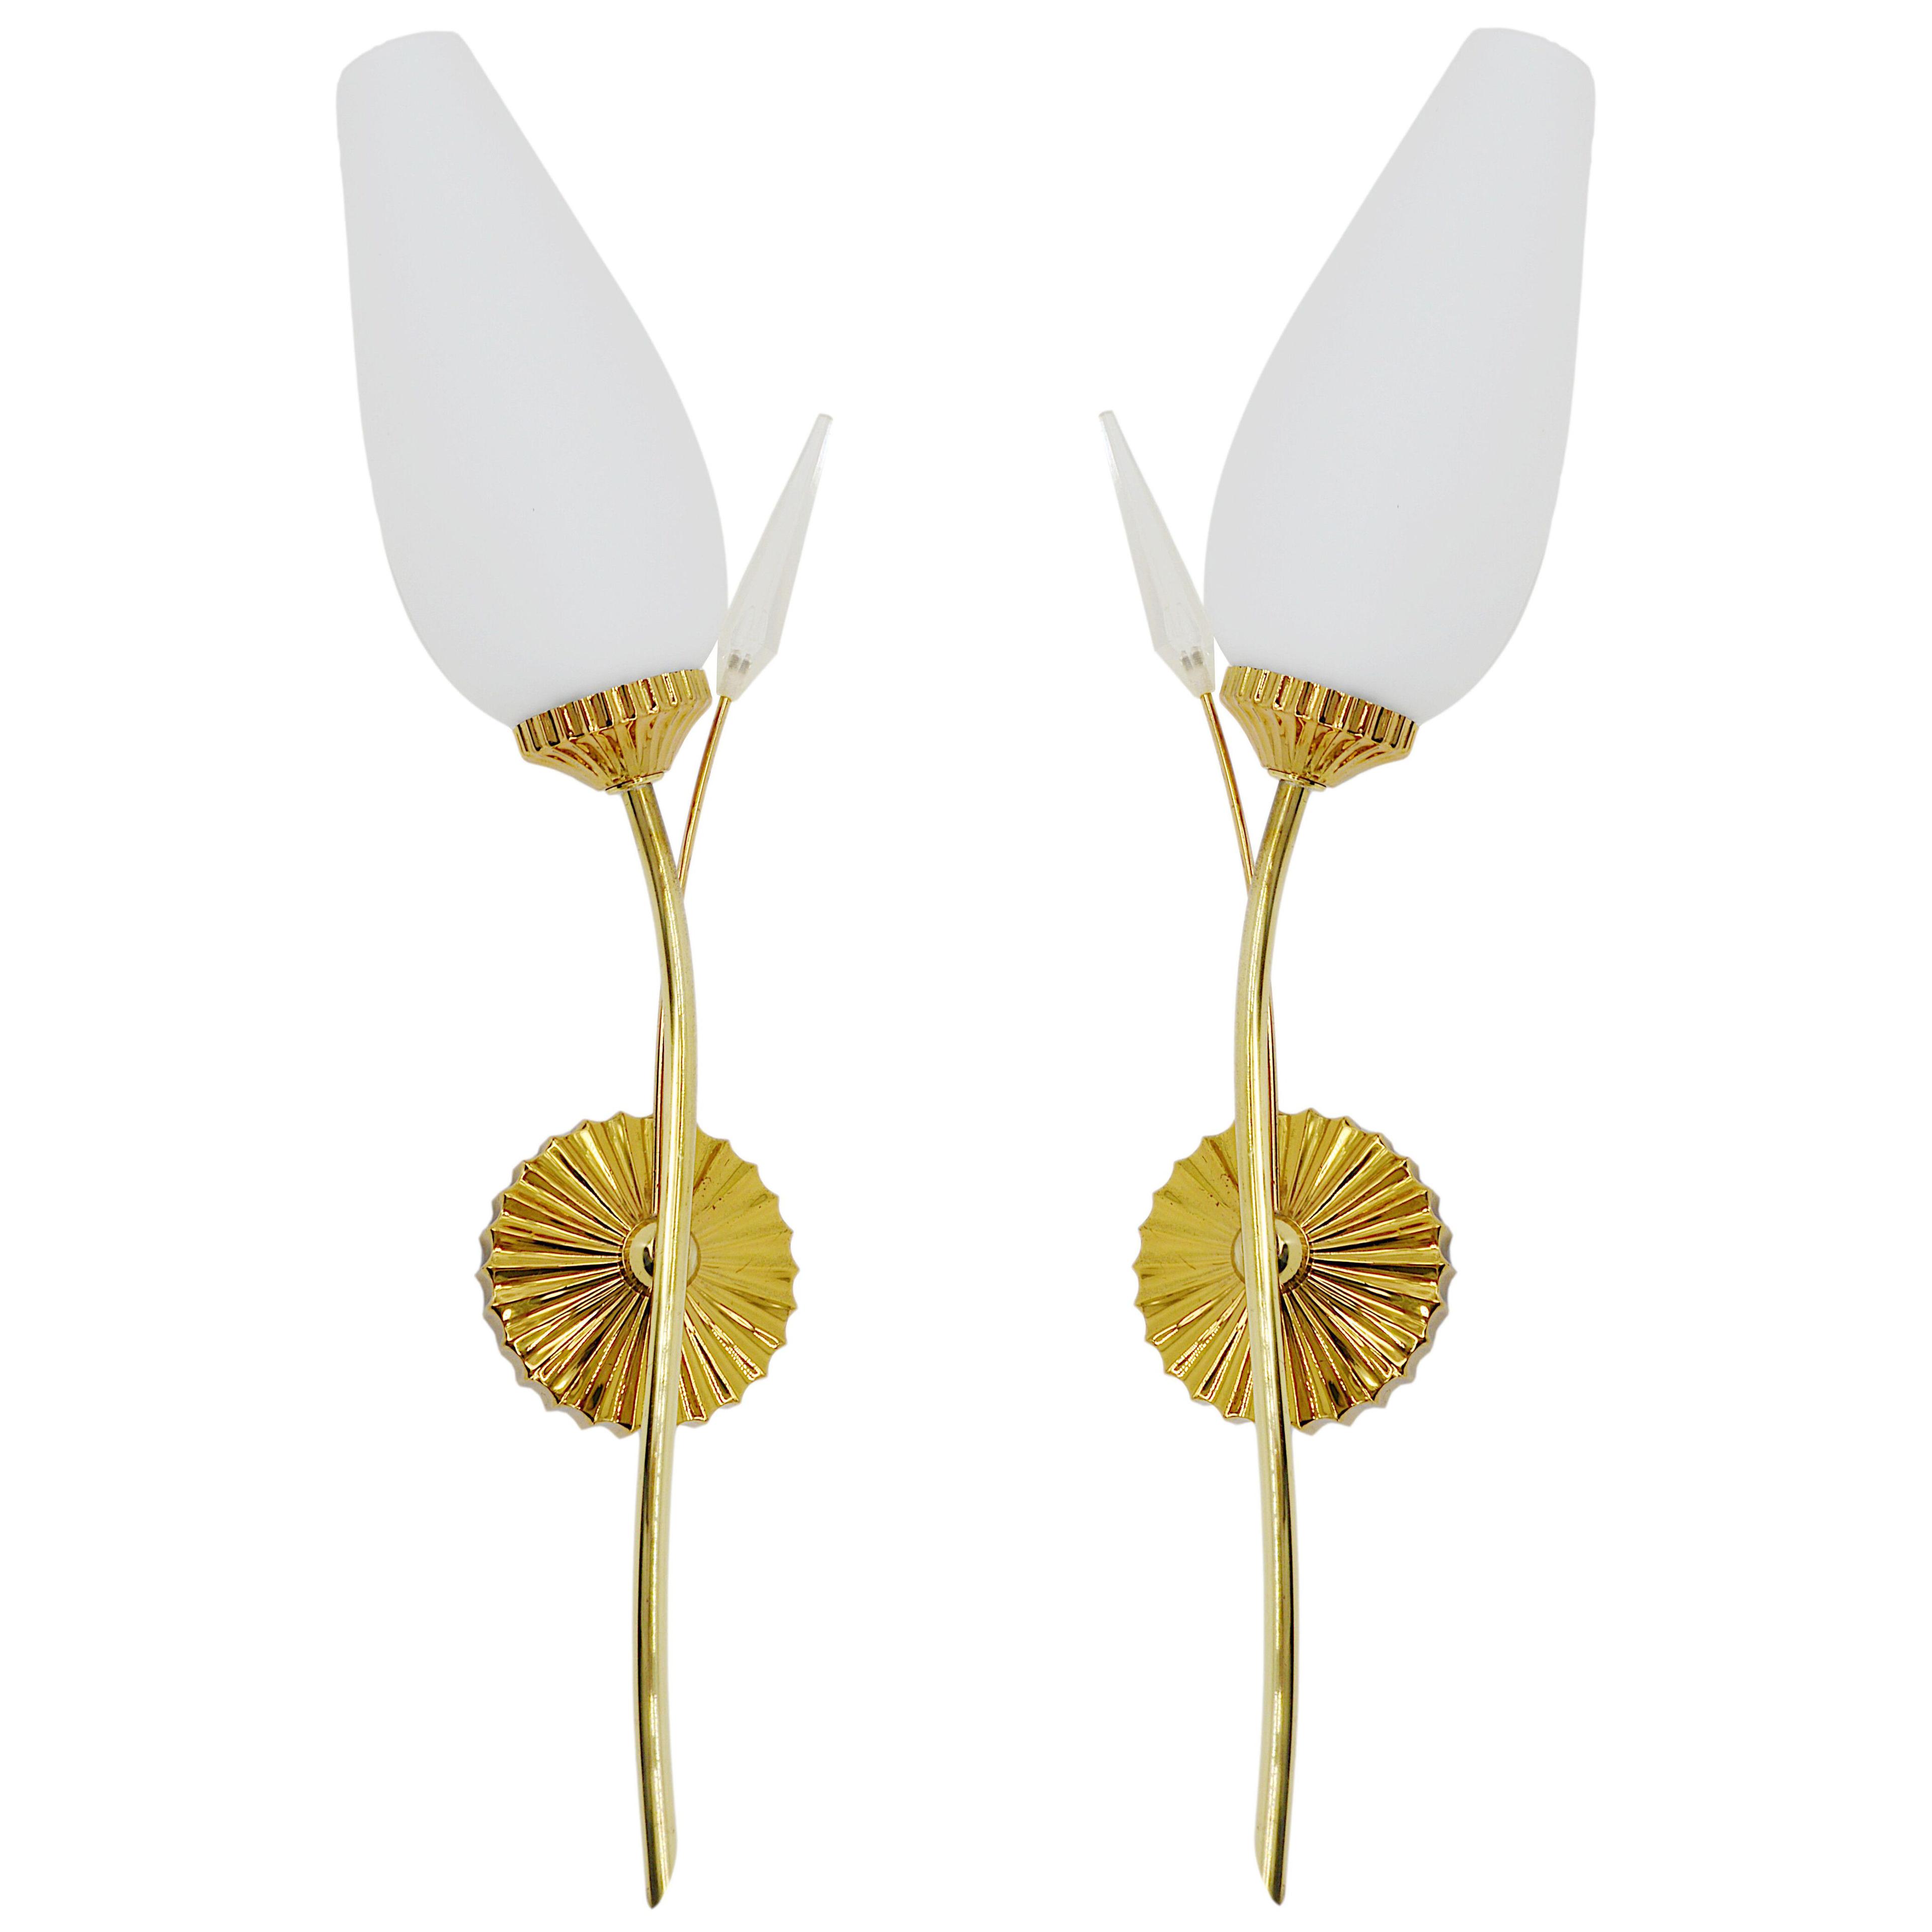 Lunel French Midcentury Pair of Wall Sconces, 1950s